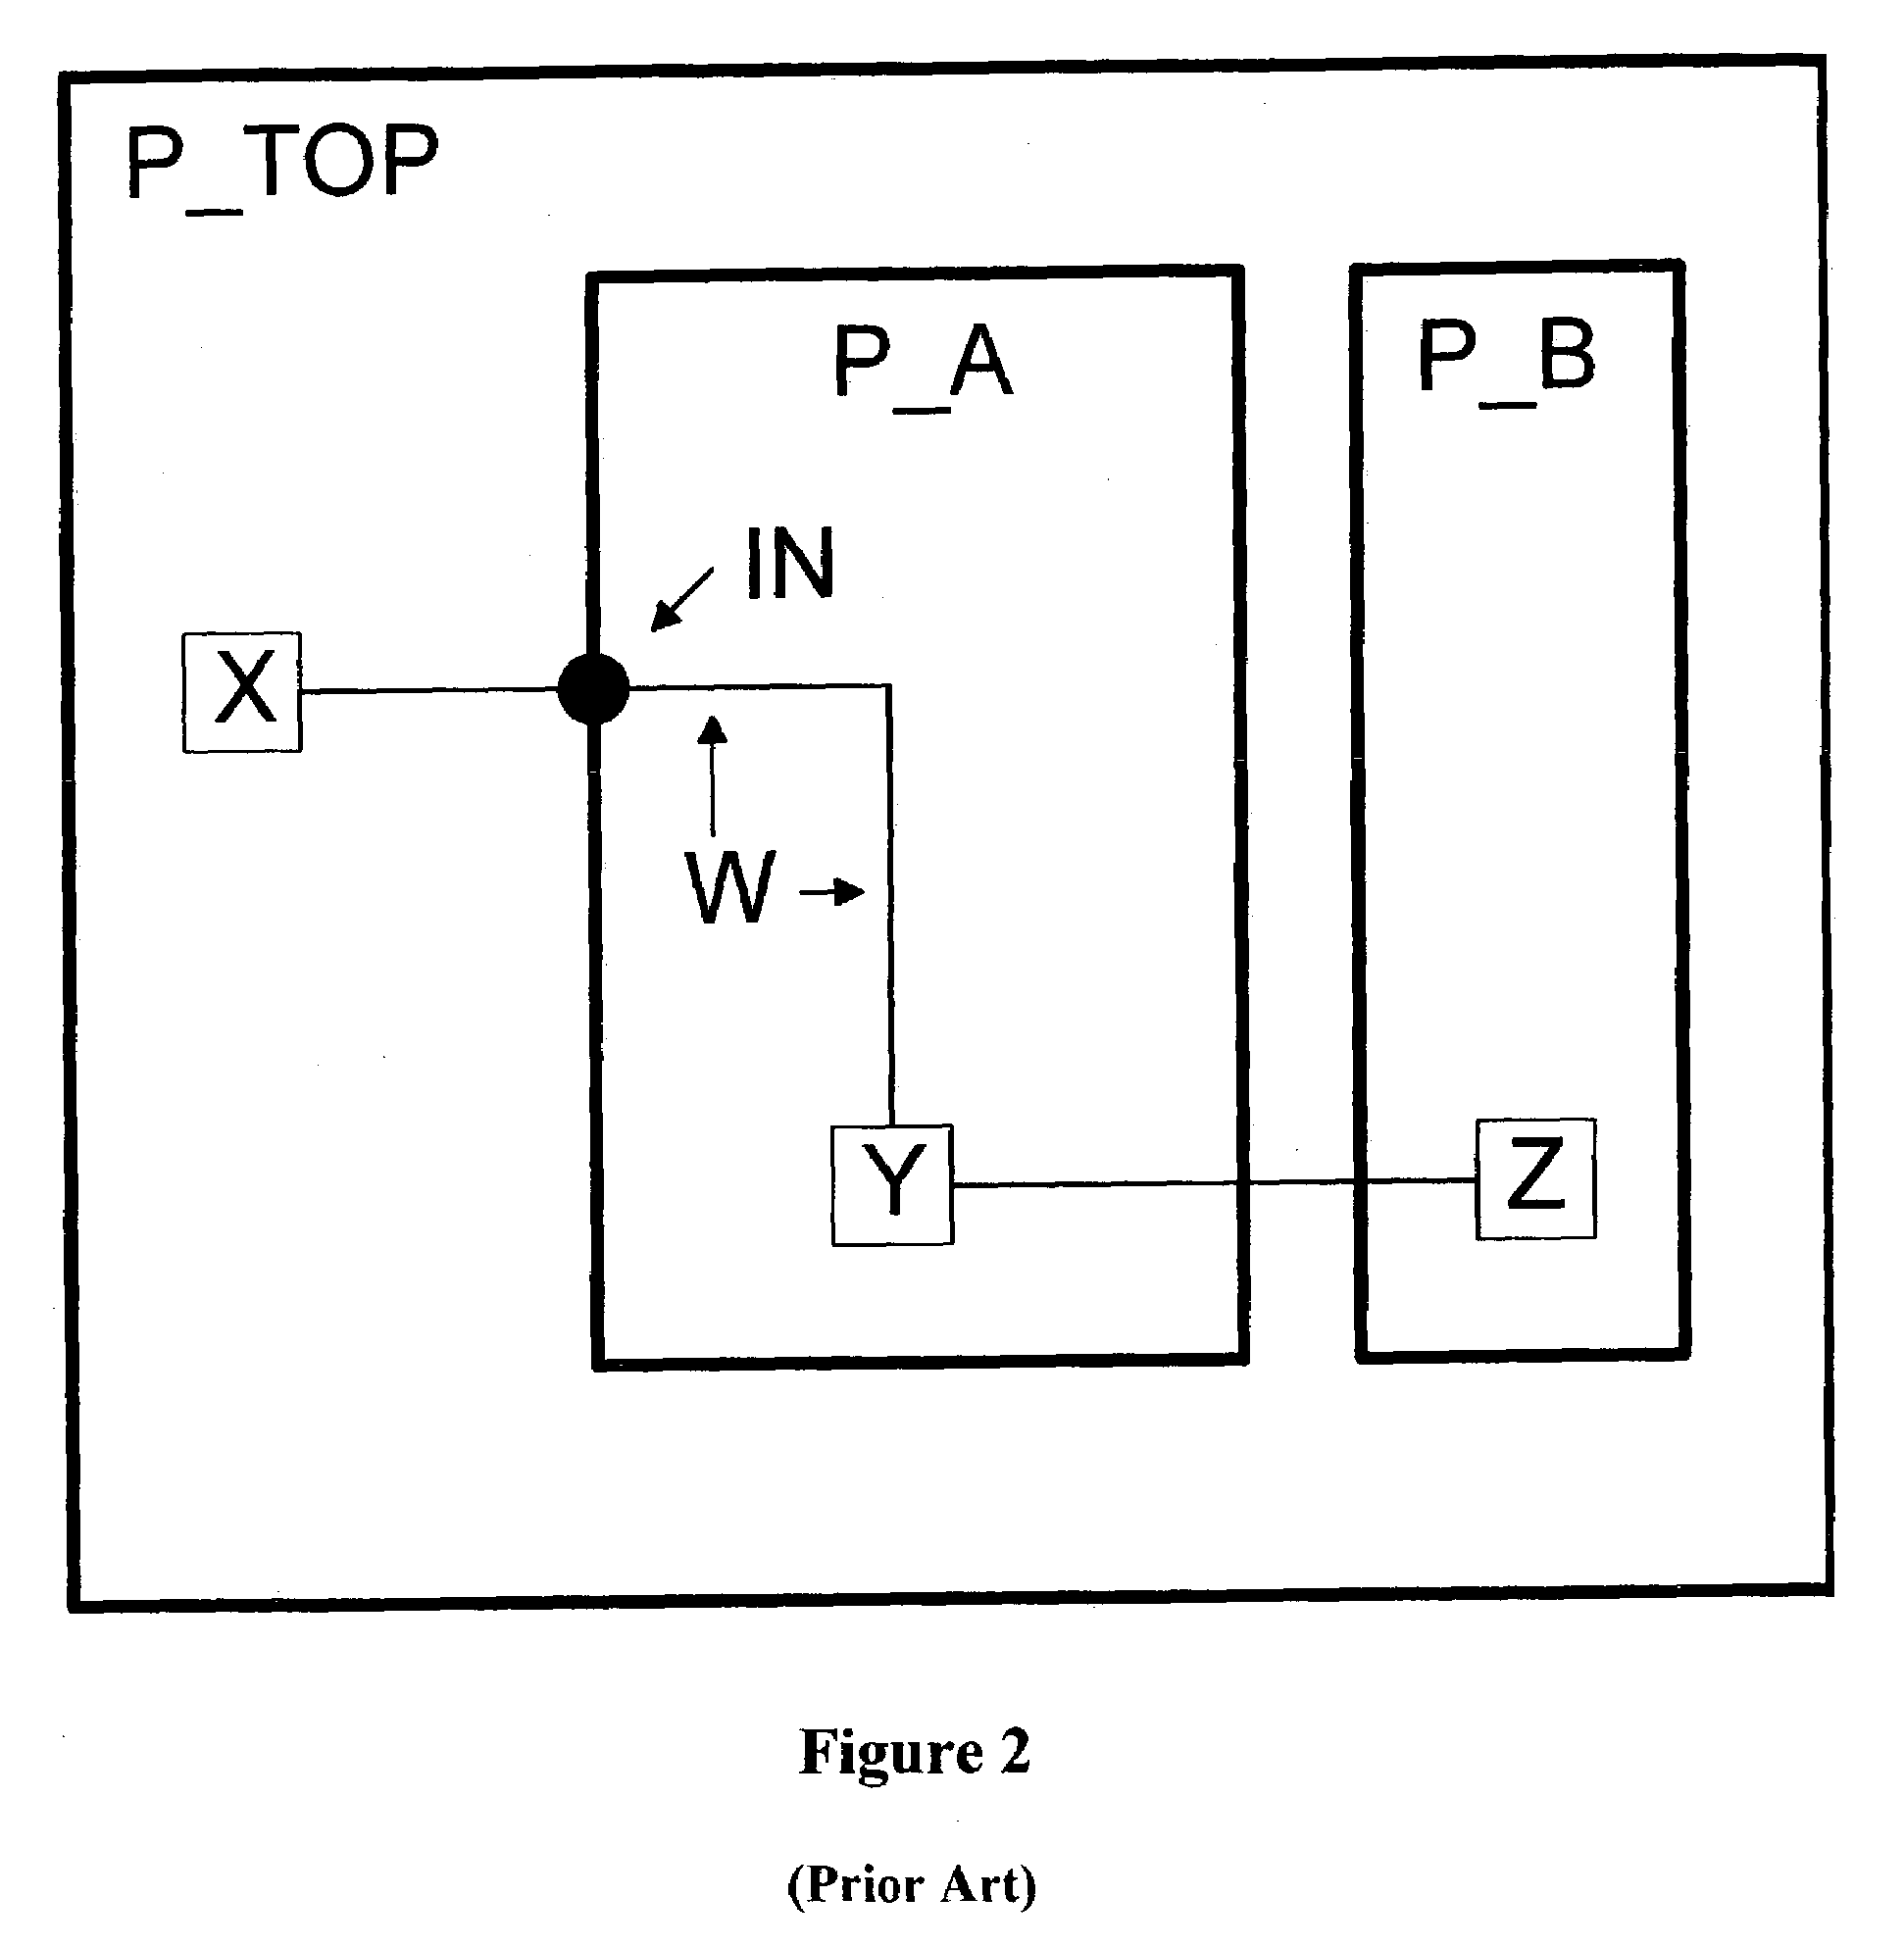 Method for performing timing closure on VLSI chips in a distributed environment